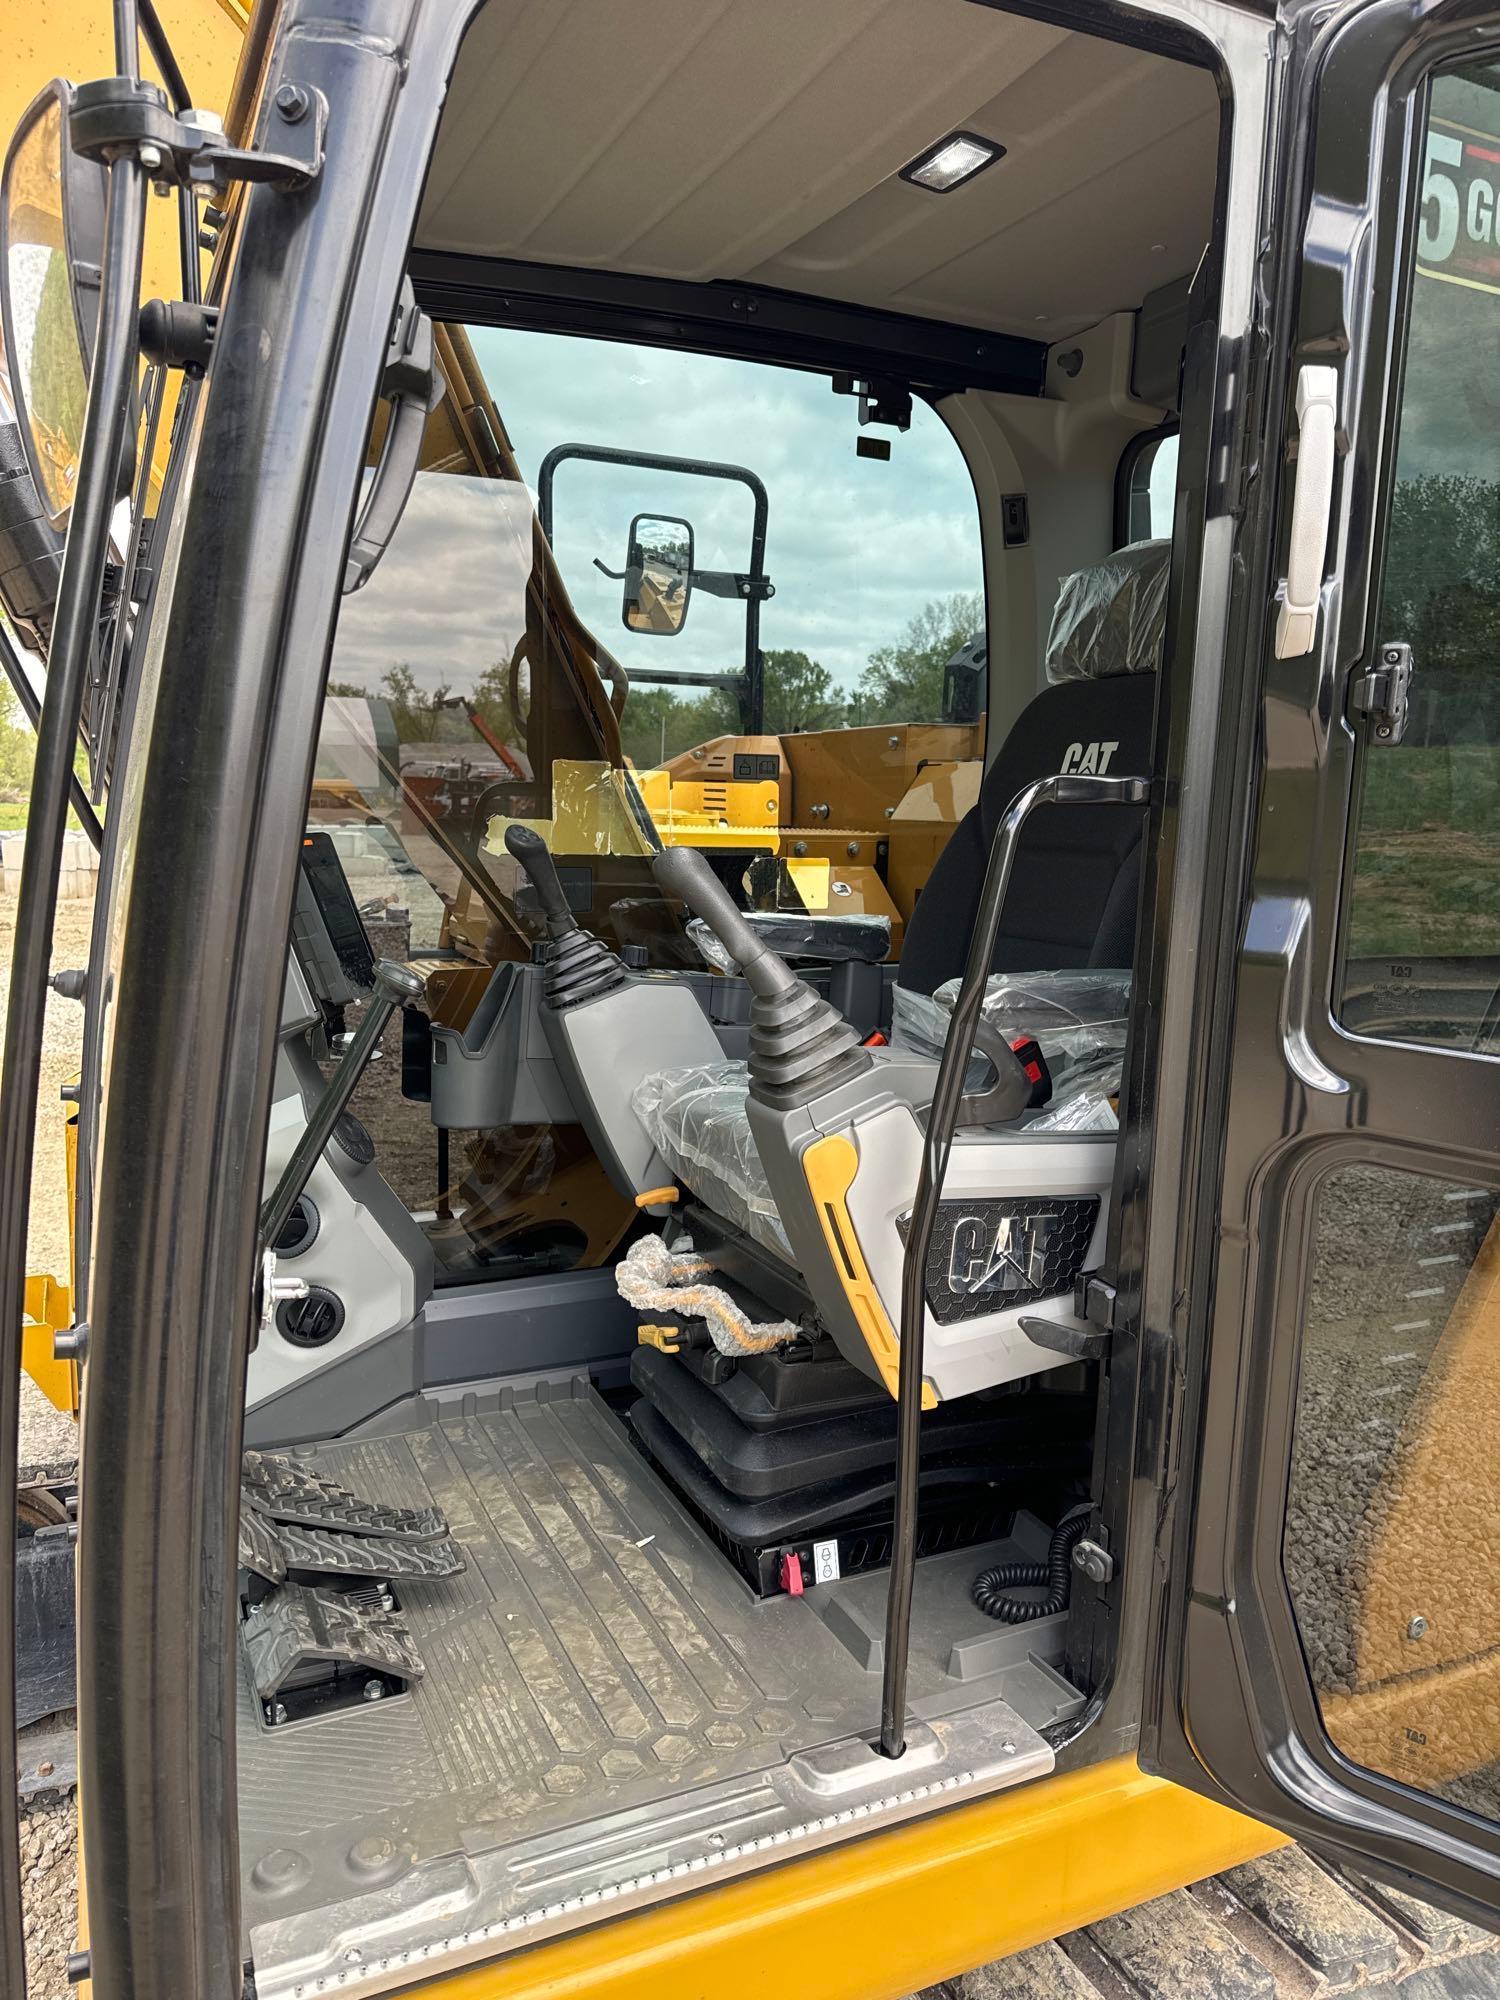 2023 CAT 315GC HYDRAULIC EXCAVATOR SN 20053 powered by Cat diesel engine, equipped with Cab, air,